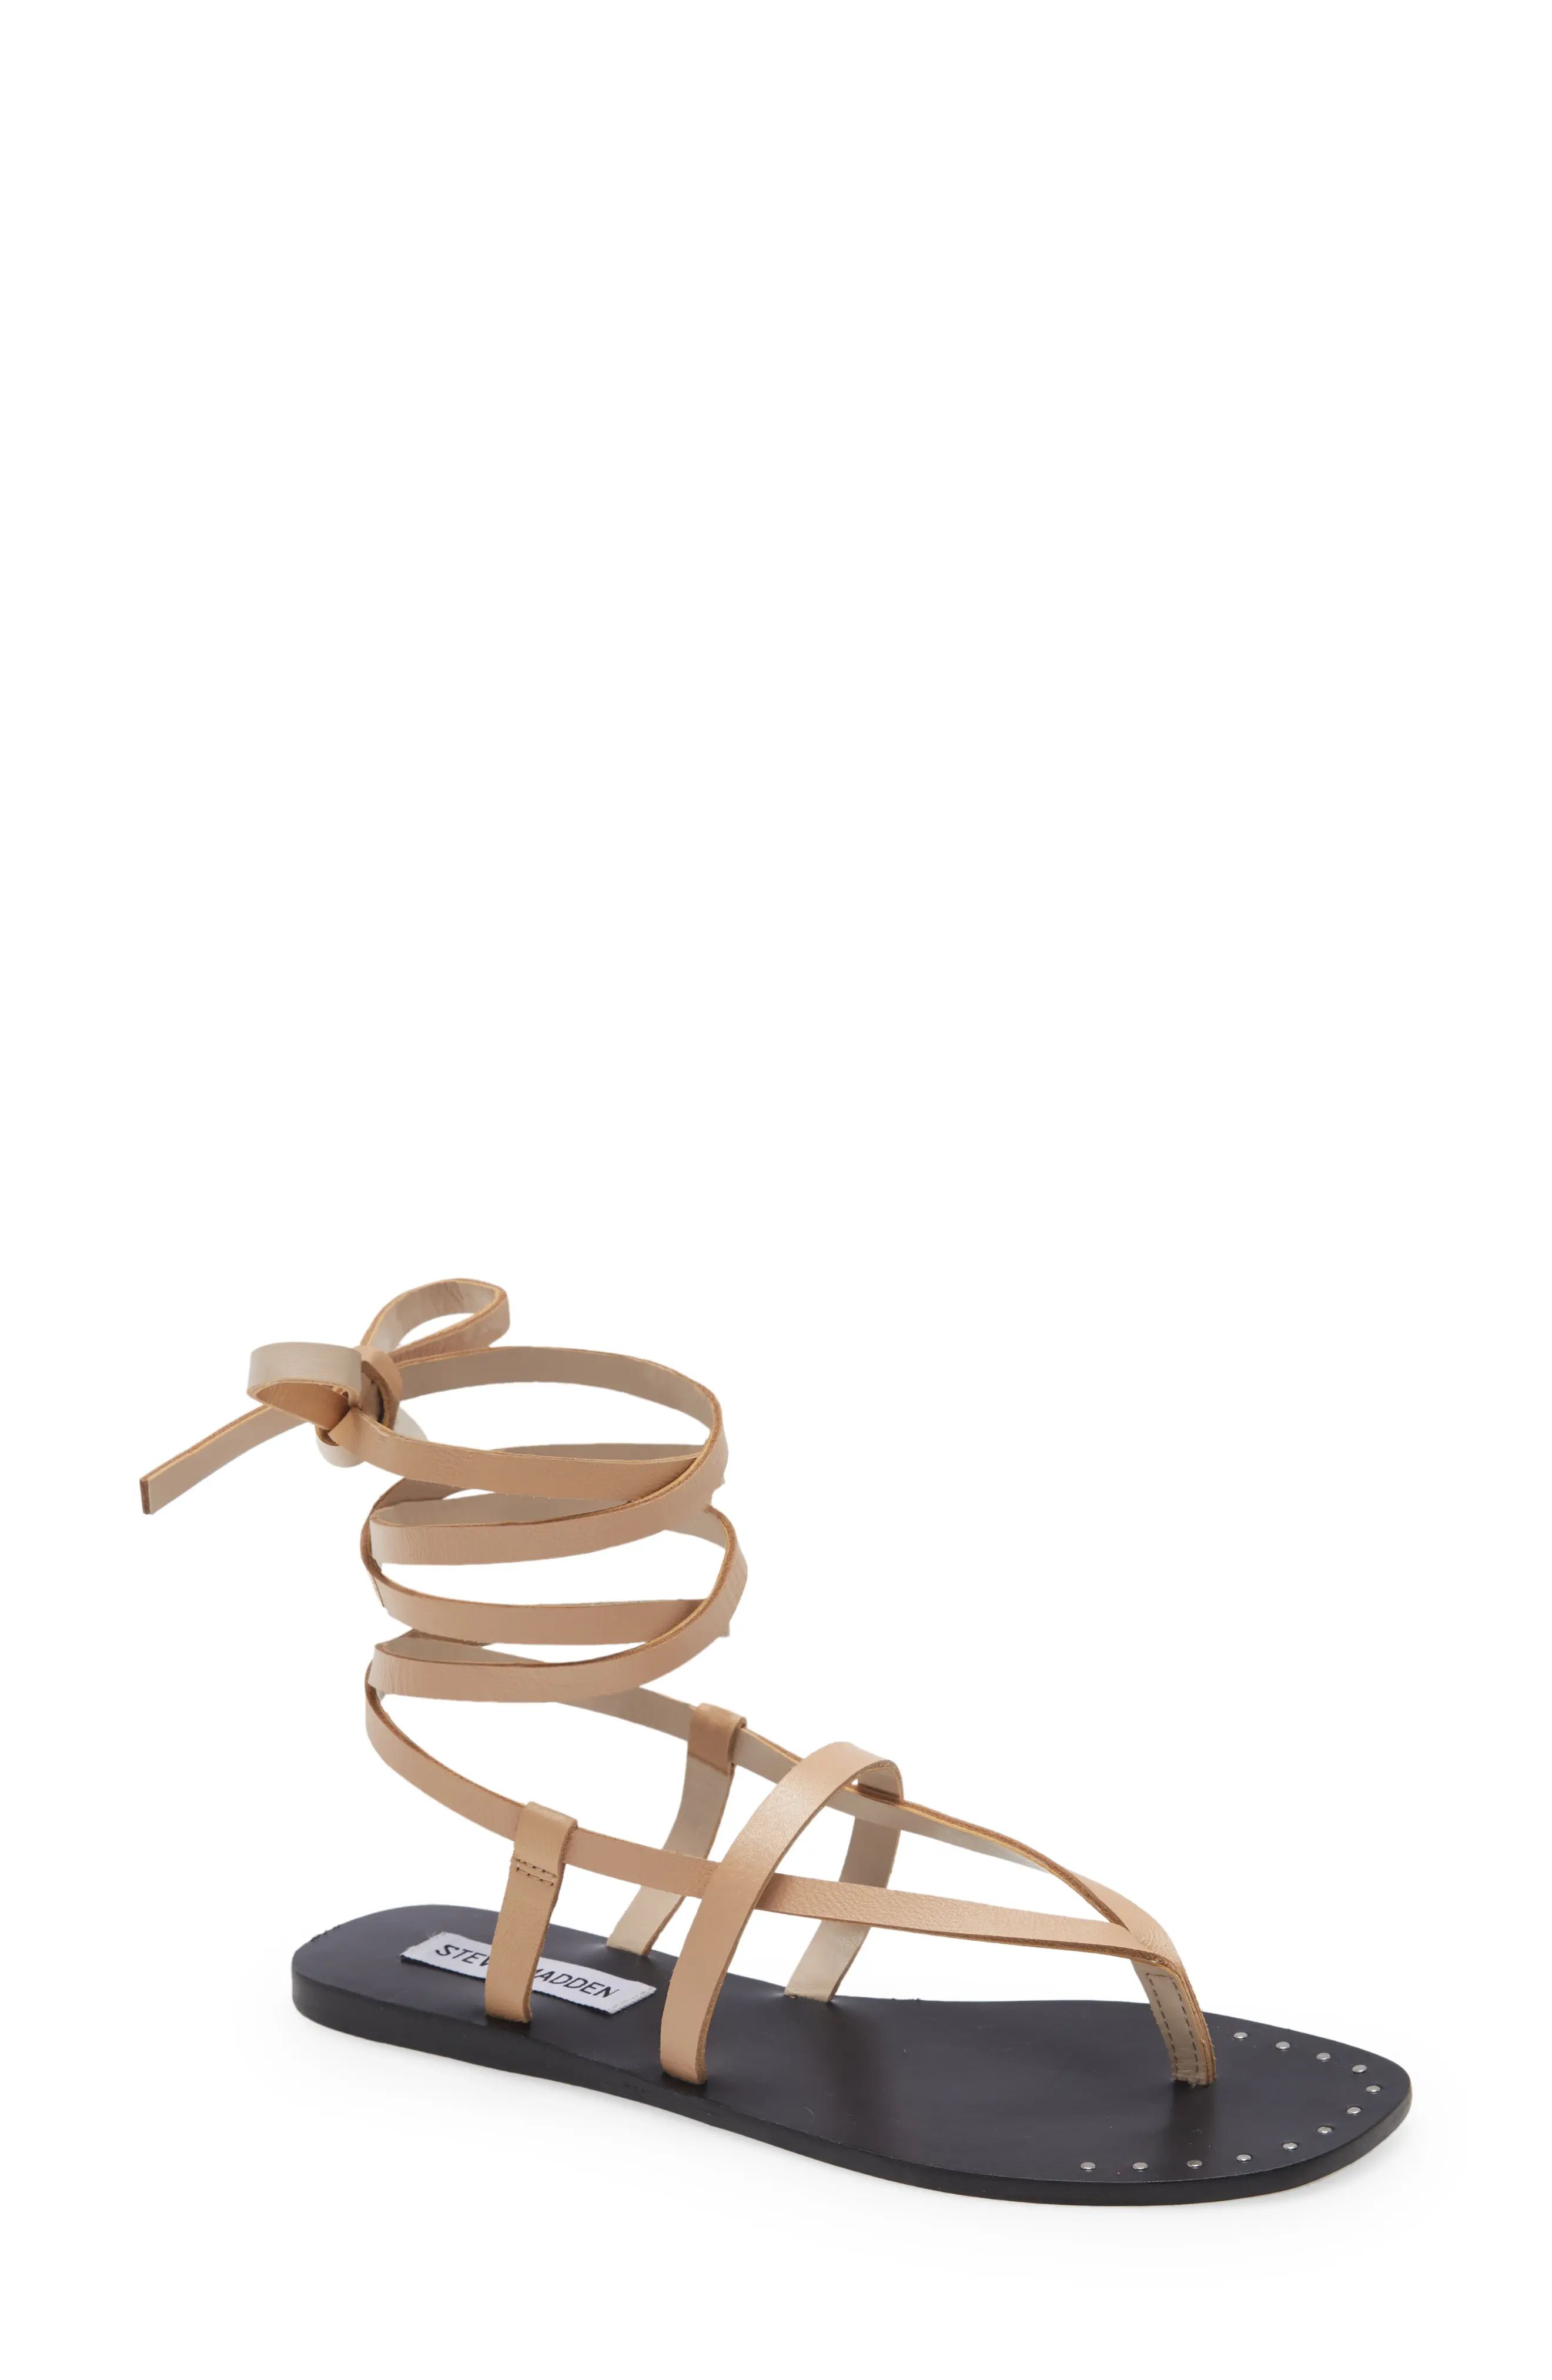 Steve Madden Seraphina Lace-Up Sandal, Size 6 in Tan Leathe at Nordstrom | Nordstrom